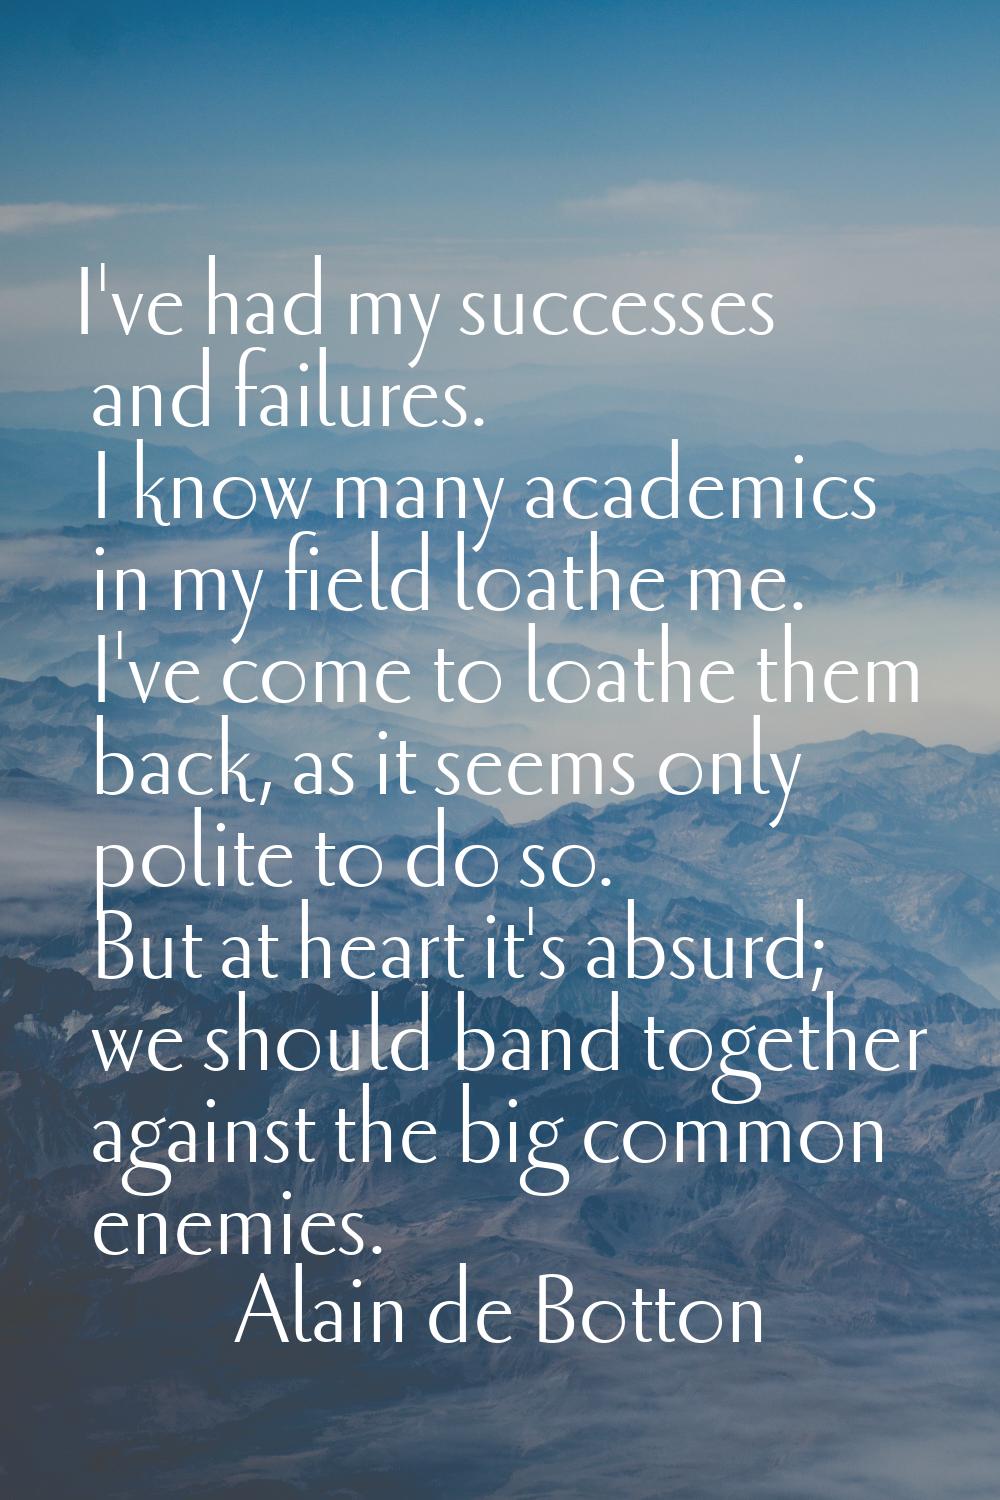 I've had my successes and failures. I know many academics in my field loathe me. I've come to loath